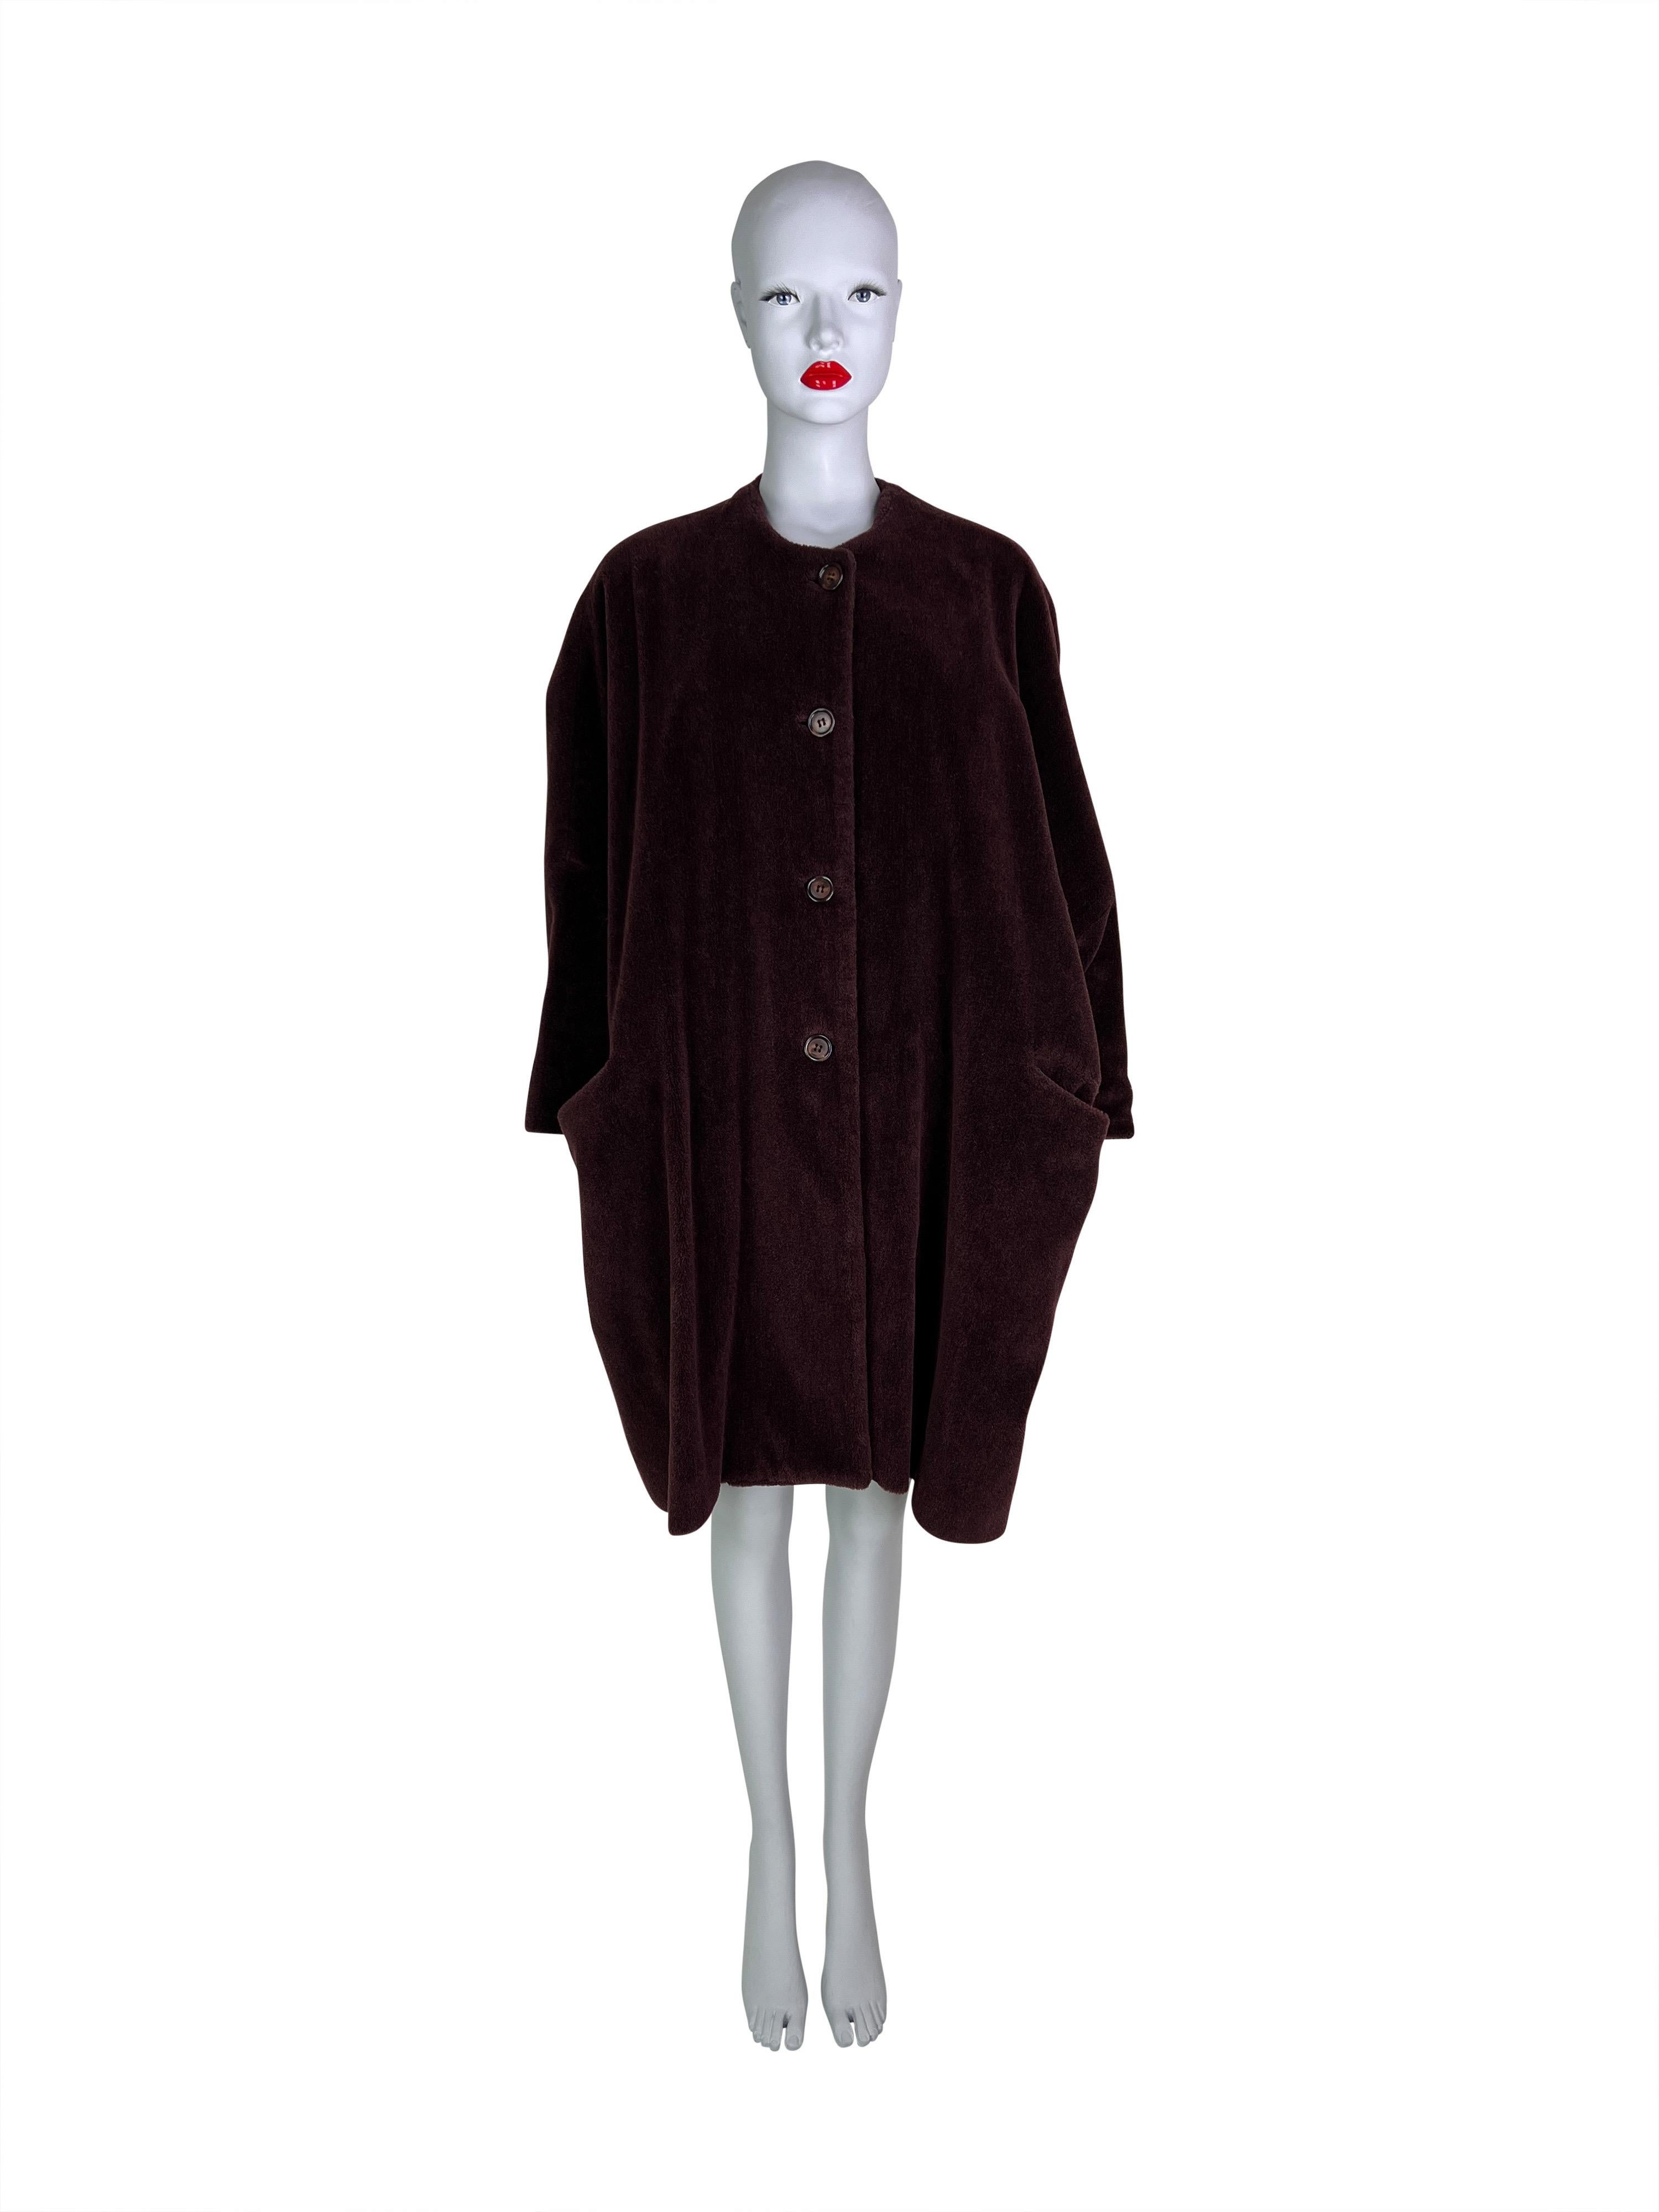 Dolce & Gabbana Fall 1990 Plush Oversized Wool Coat In Good Condition For Sale In Prague, CZ